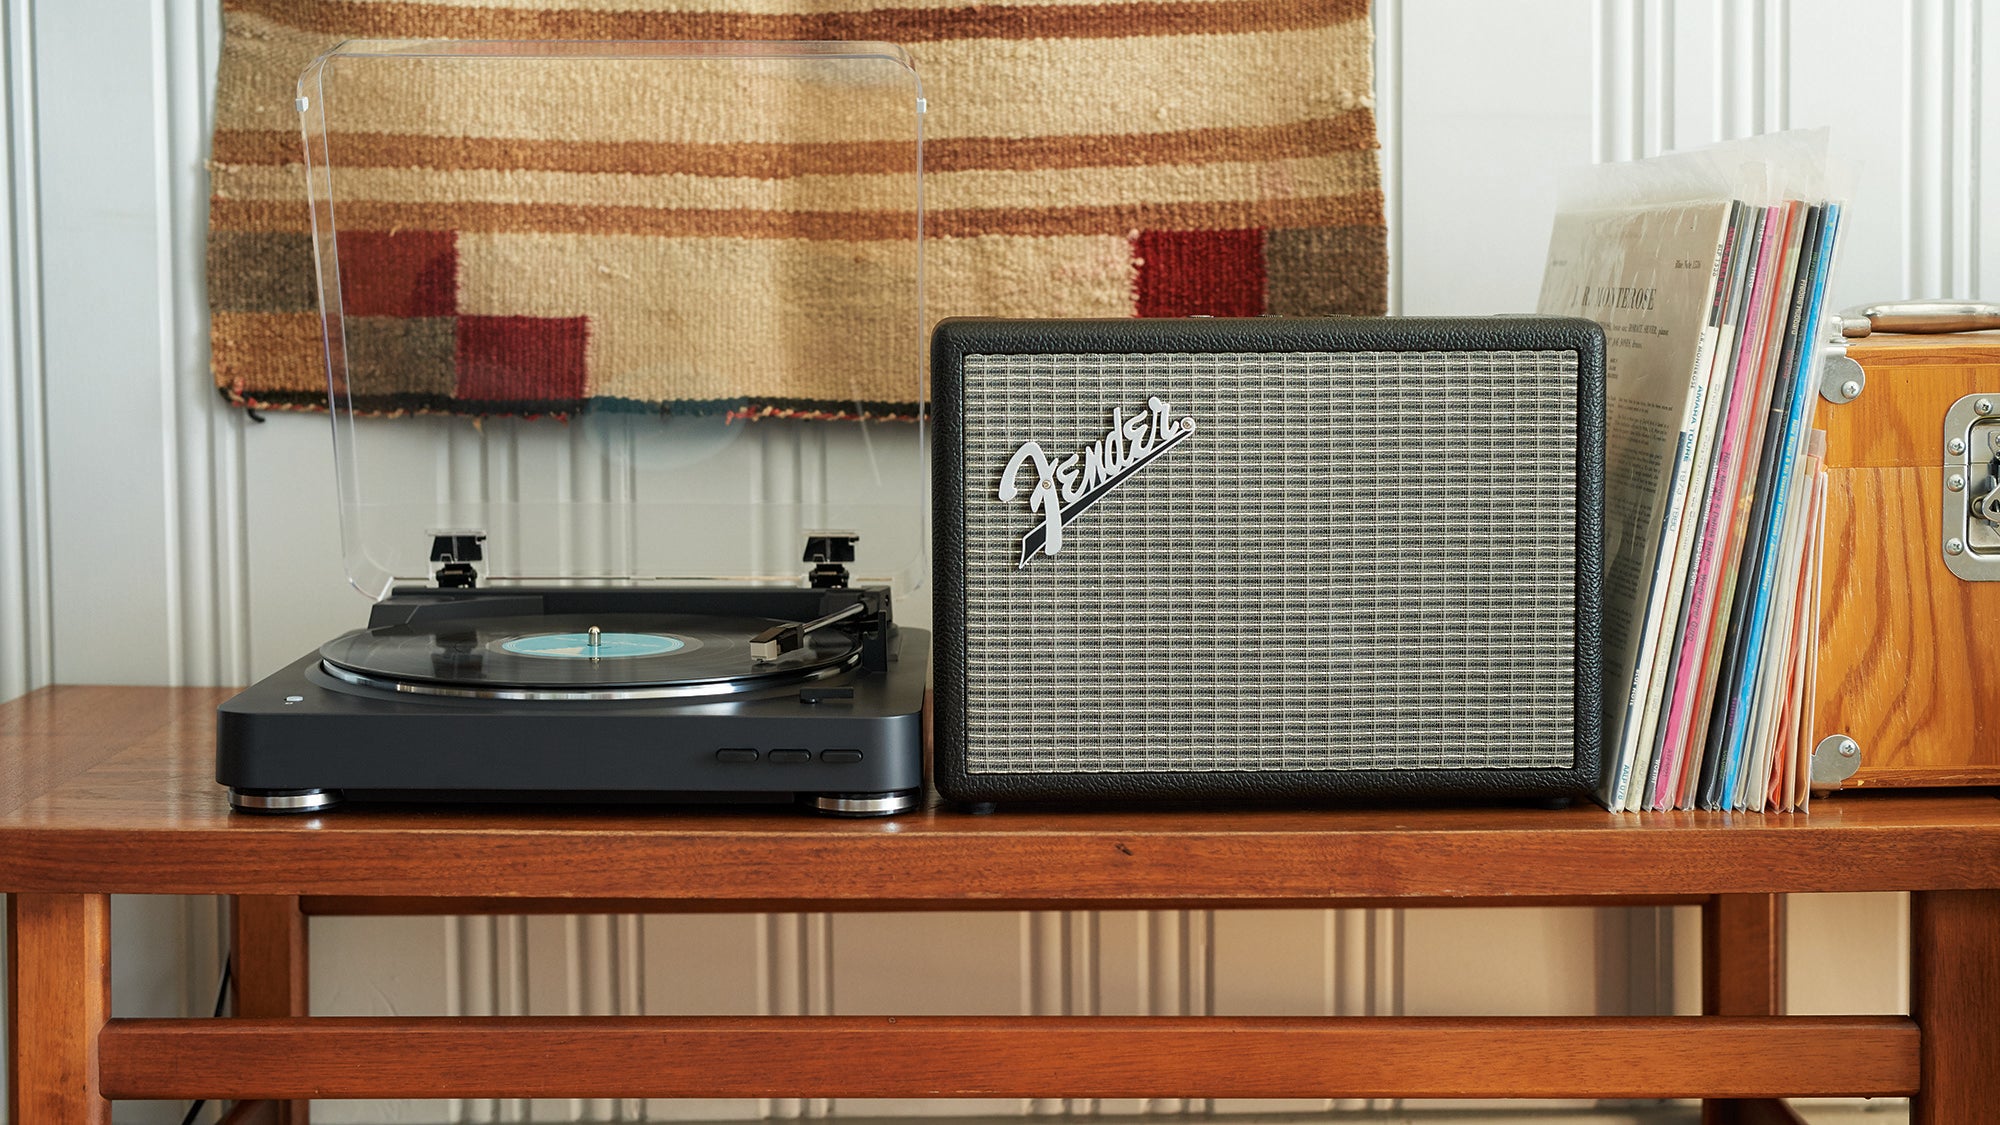 Fender Monterey Bluetooth speaker on wooden table with turntable.